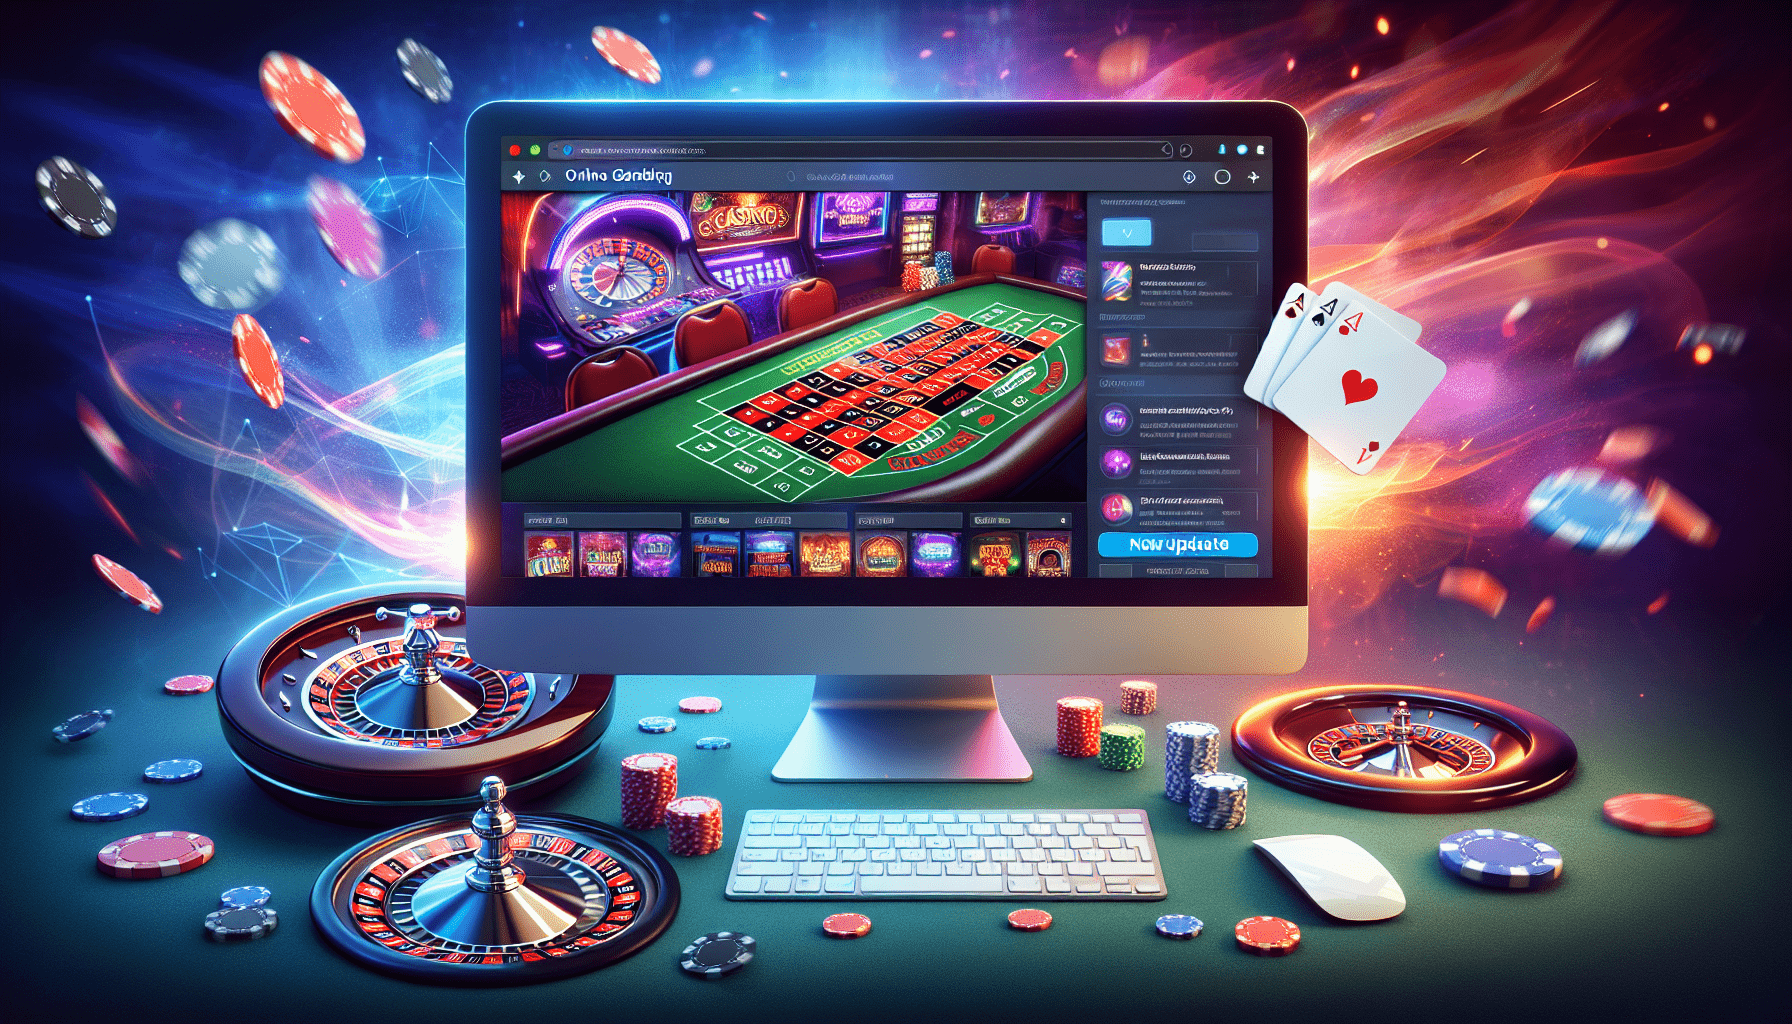 How Do I Update My Browser For The Best Casino Experience?